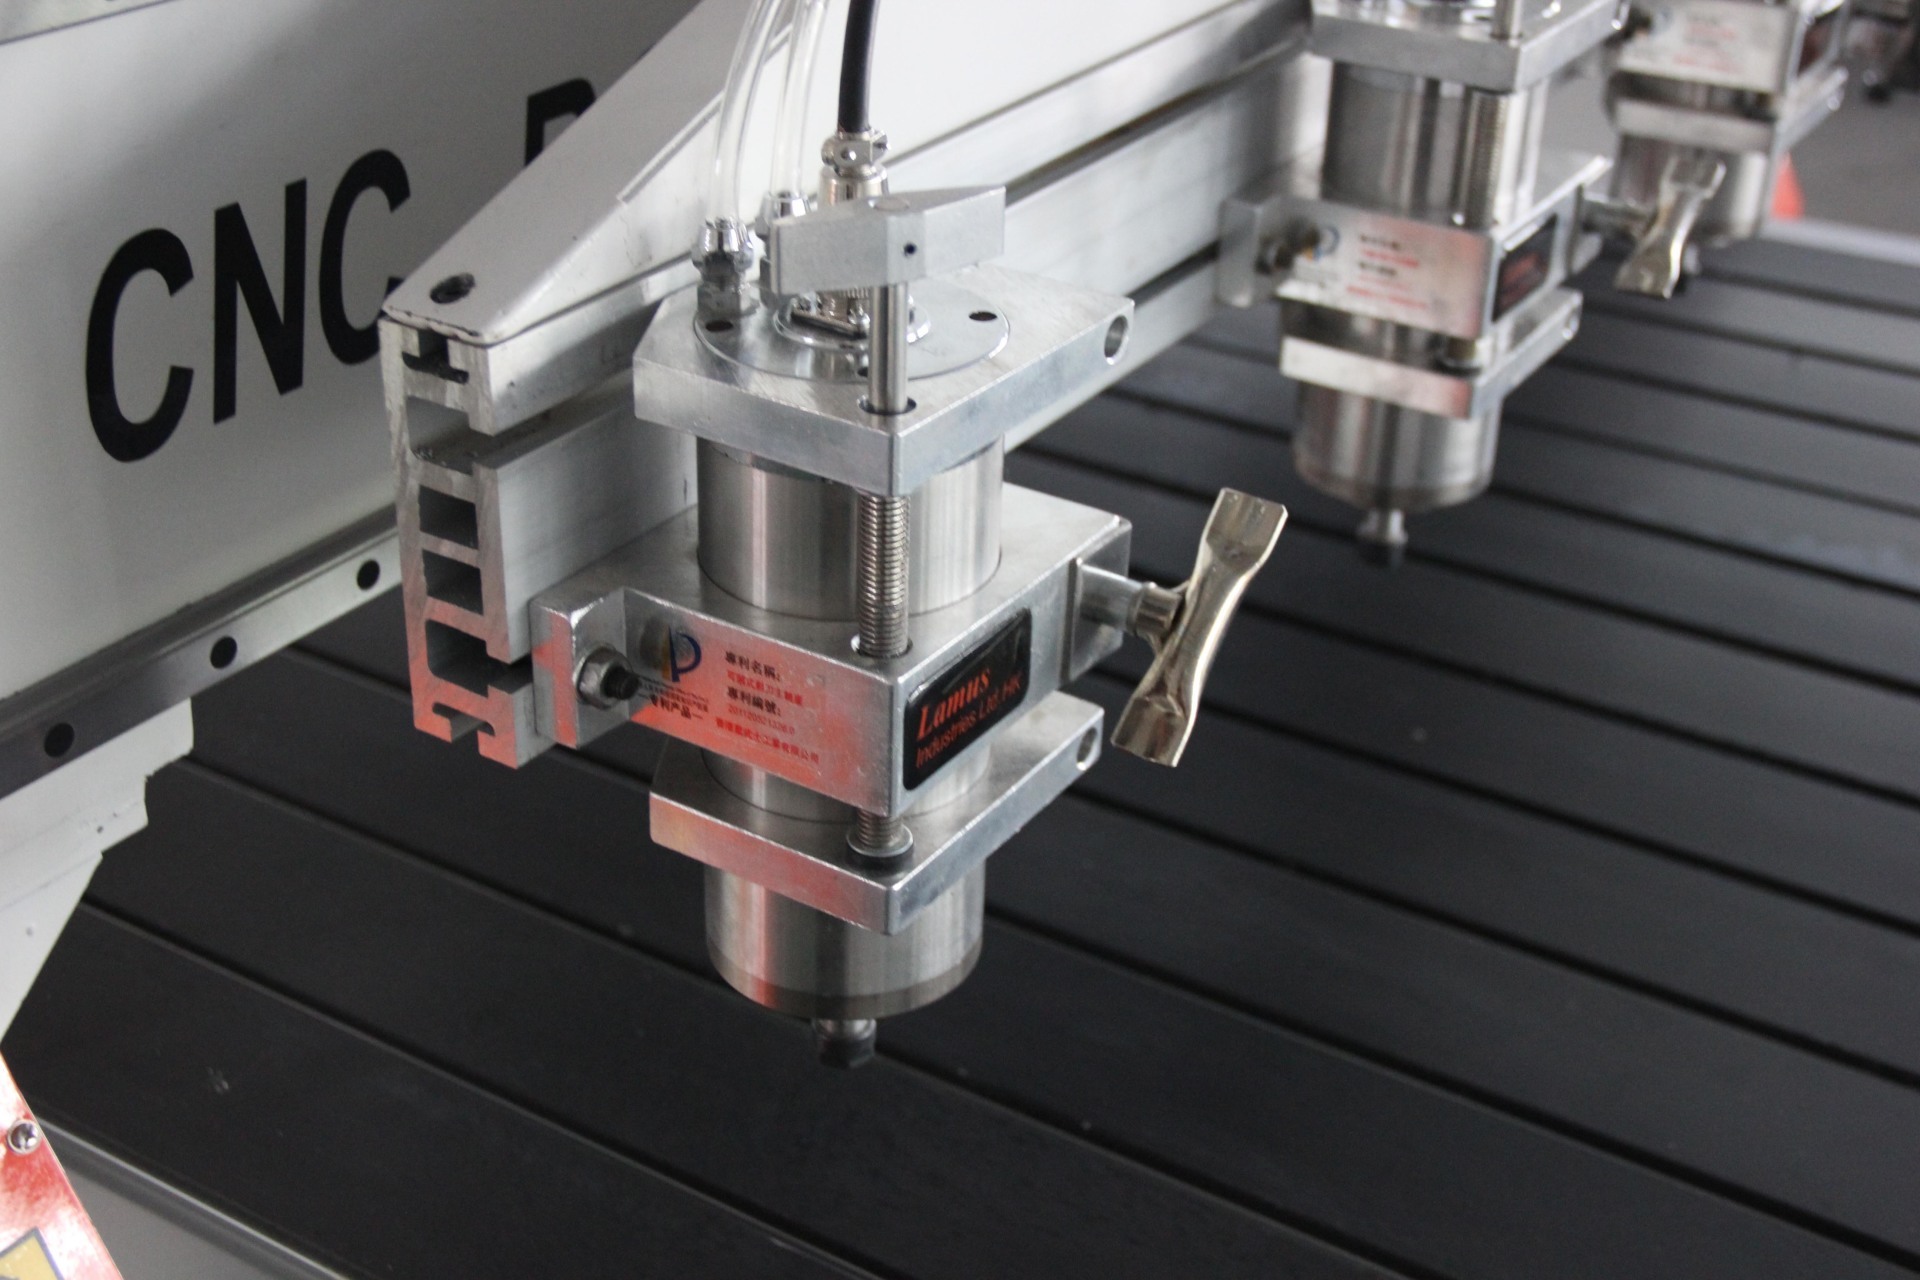 XL 1325-4 Wood Relief Cnc Routers